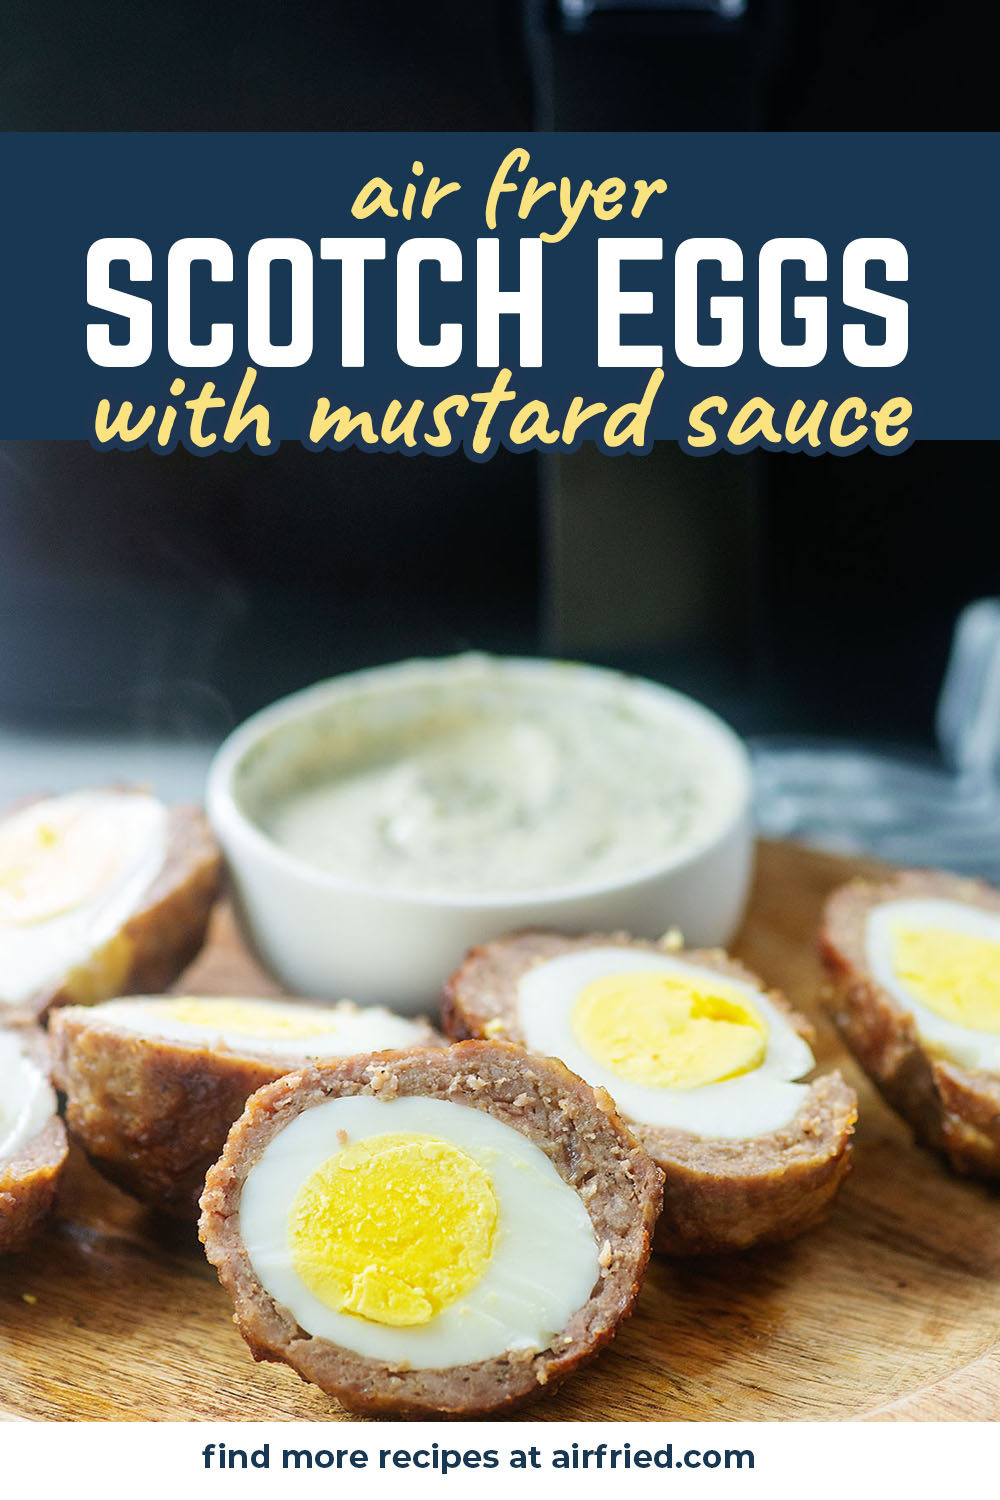 Scotch Eggs are the perfect snack and they're so easy thanks to the air fryer. These are keto and they go great with our simple mustard sauce.